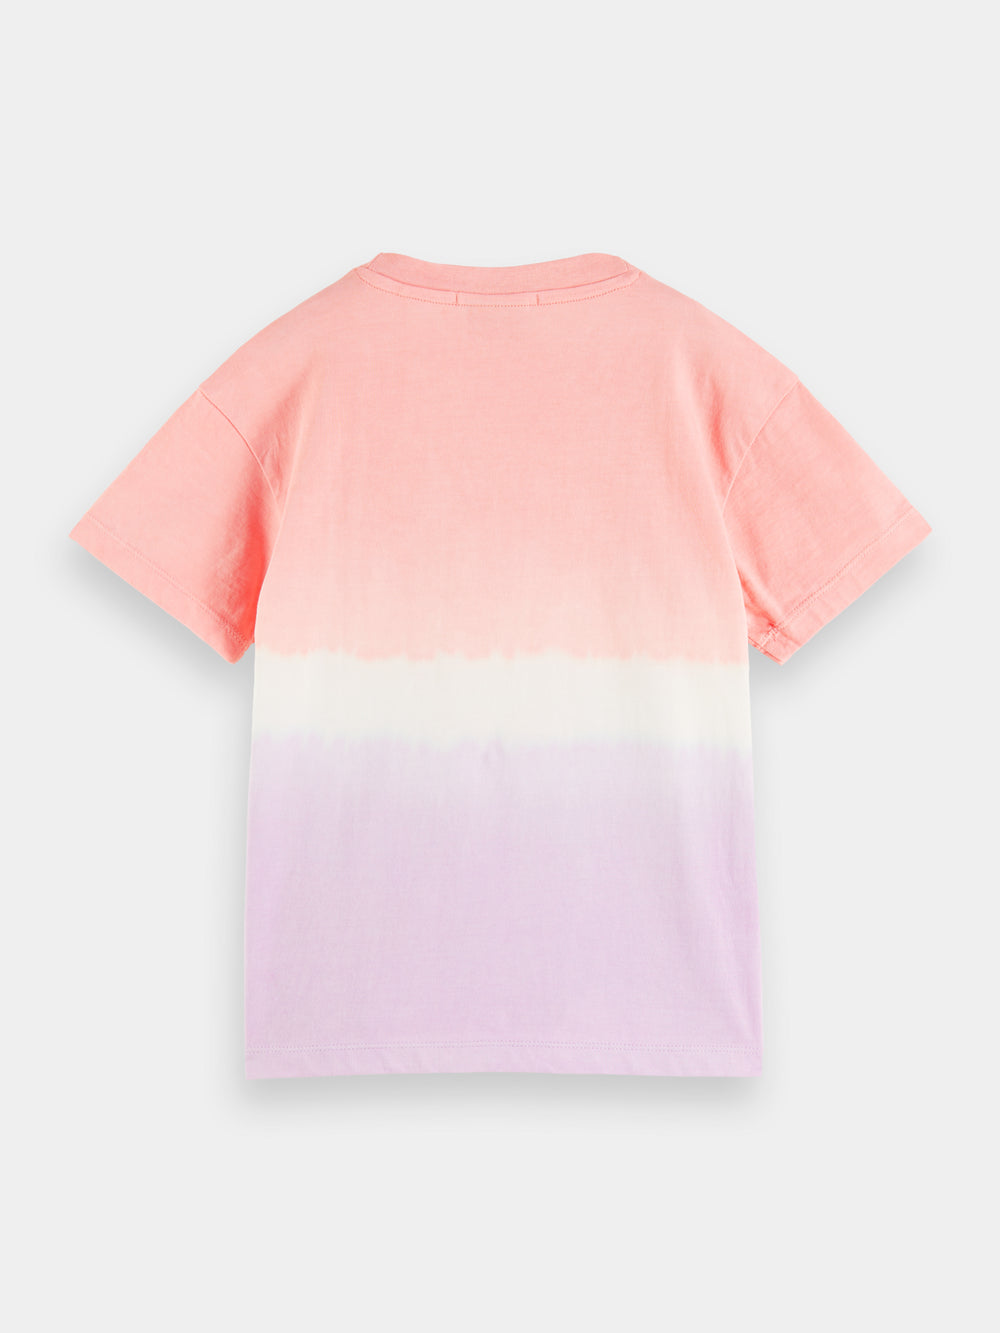 Relaxed fit dip-dyed artwork t-shirt - Scotch & Soda AU